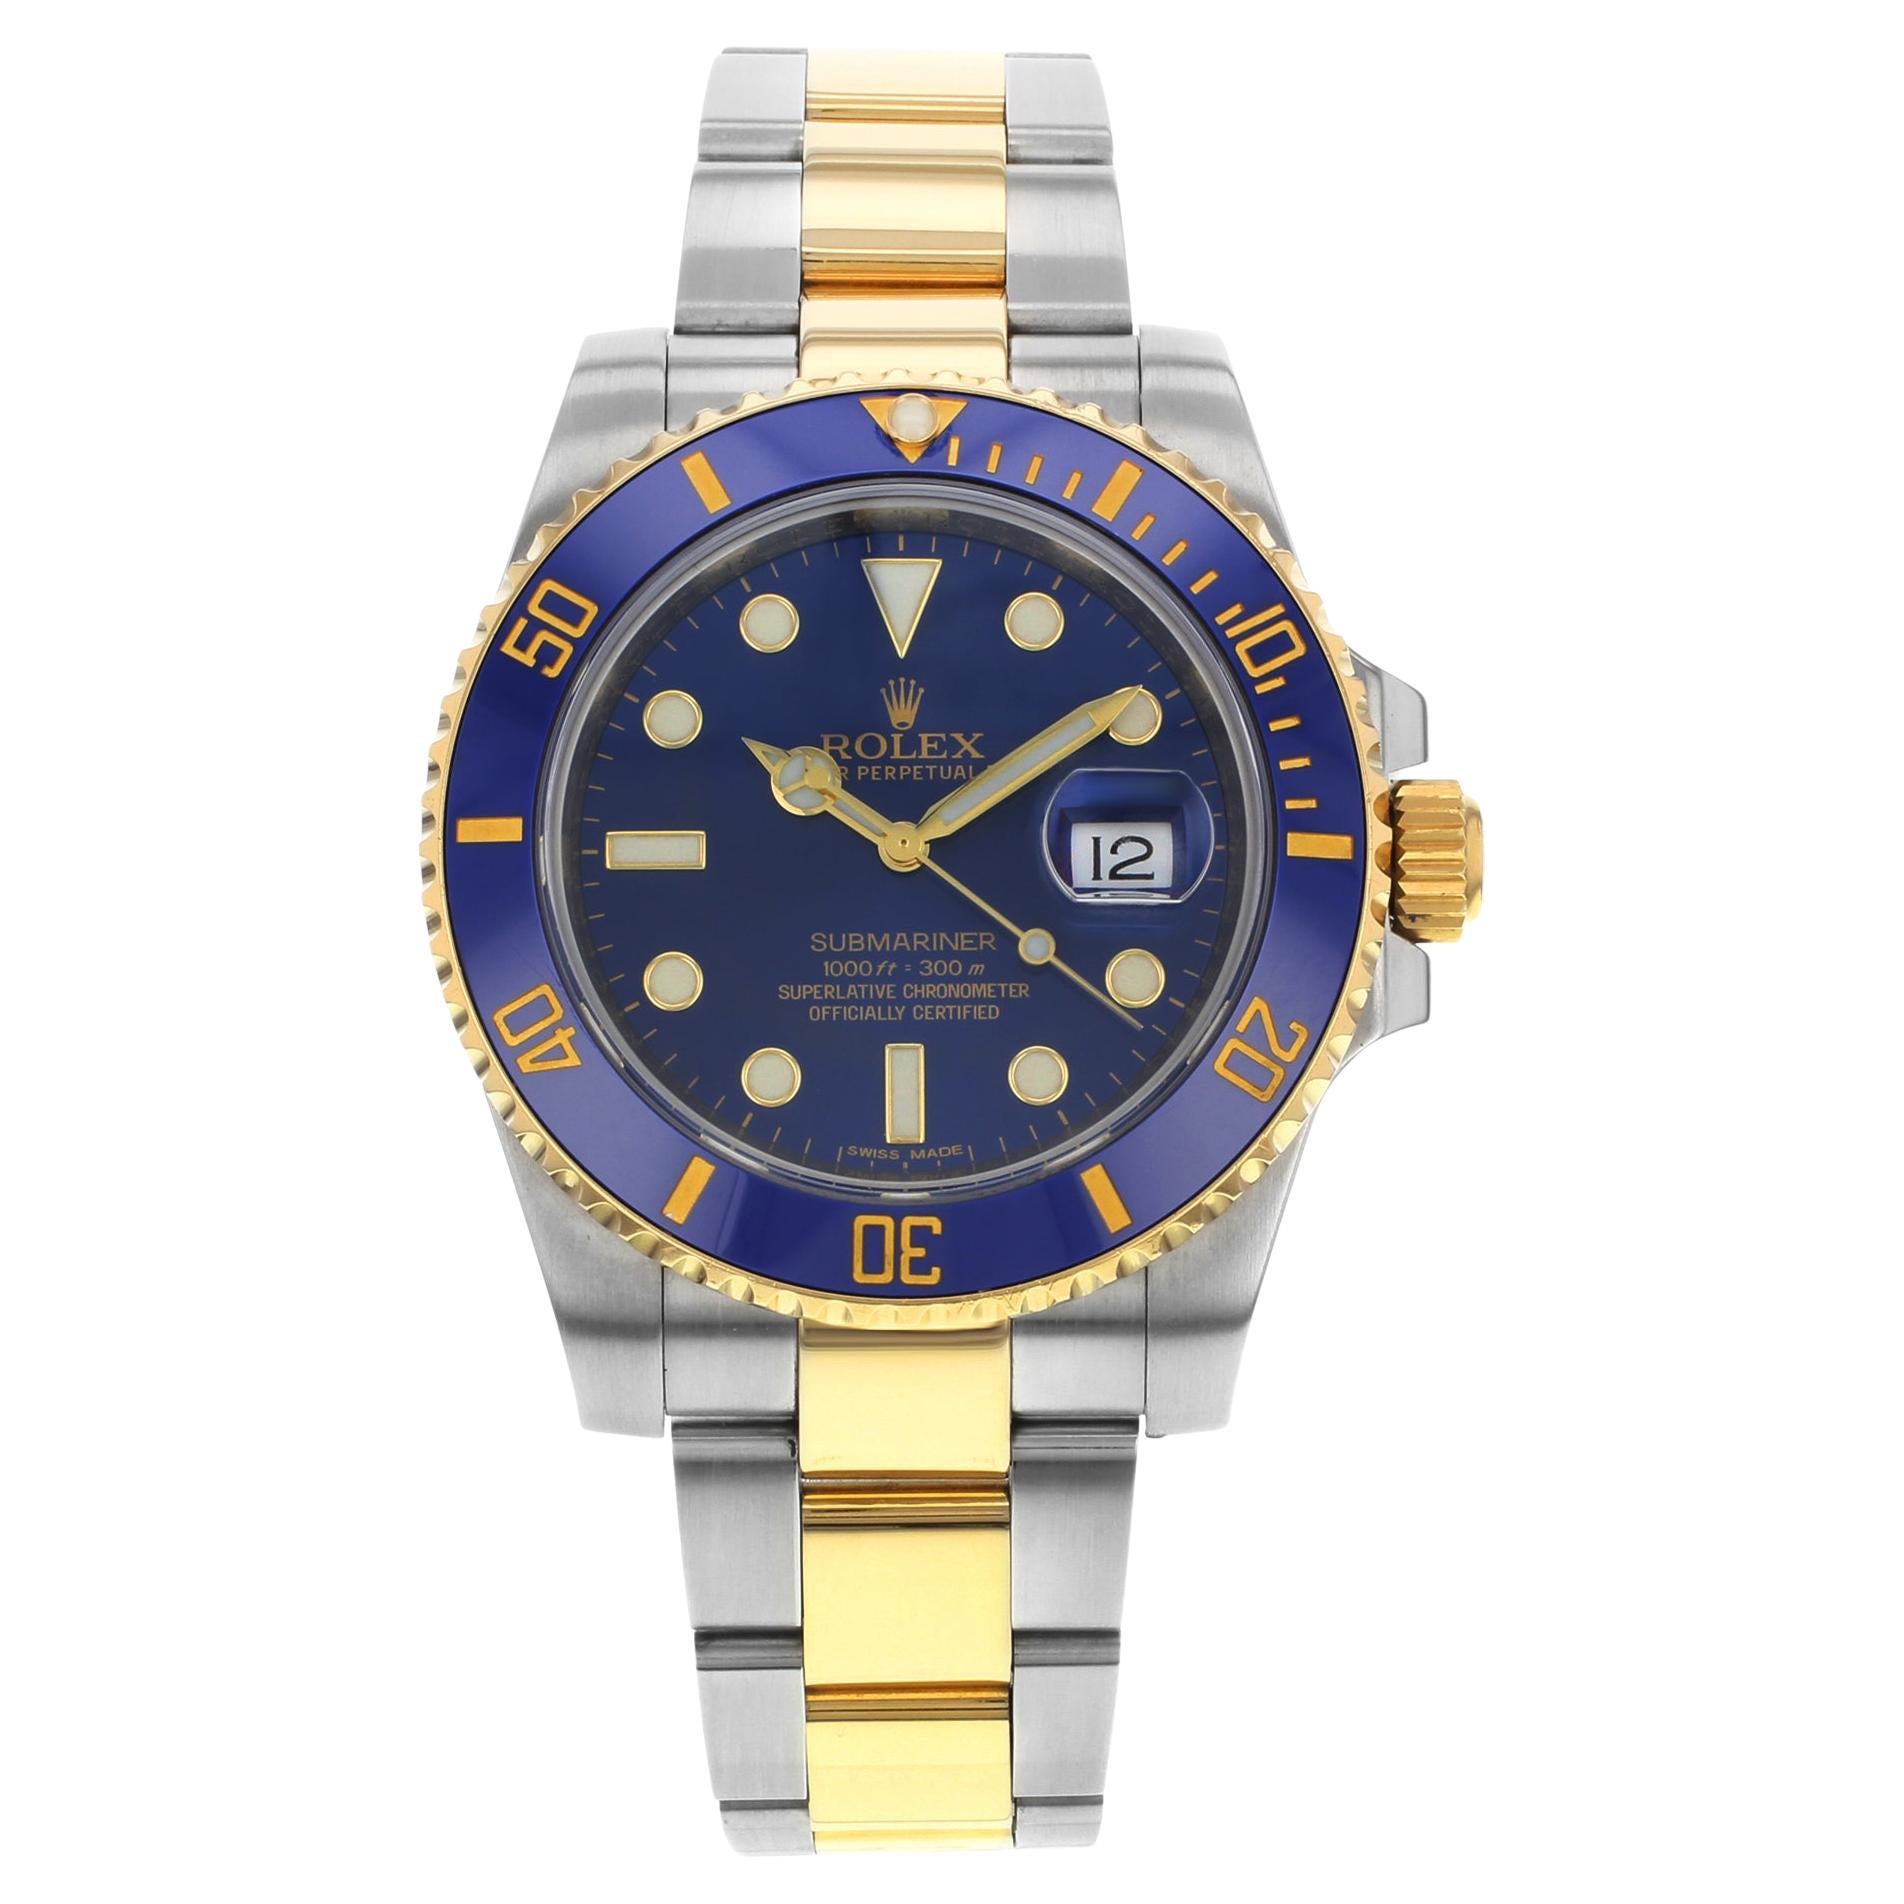 Rolex Submariner 18k Gold Steel Ceramic Blue Dial Automatic Mens Watch 116613LB For Sale